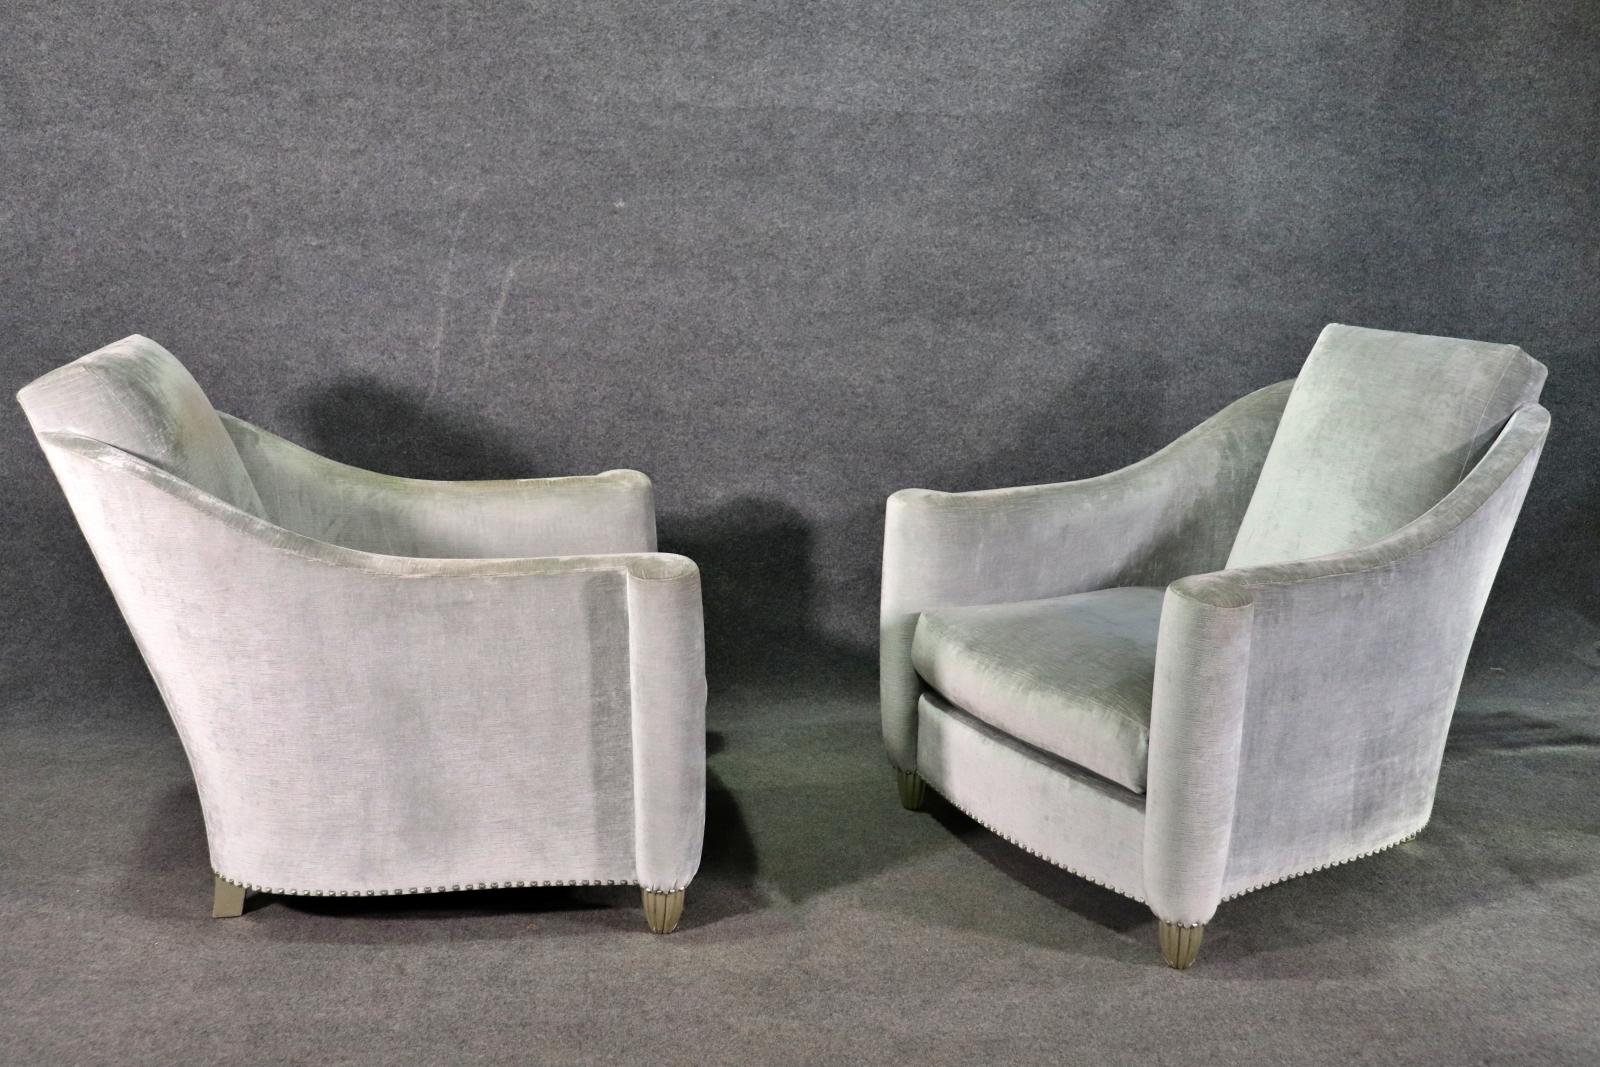 Pair of lovely deco style arm chairs in grey velvet. Long sloping back with scrolled arms and nail head trim around the base.
Please confirm location NY or NJ